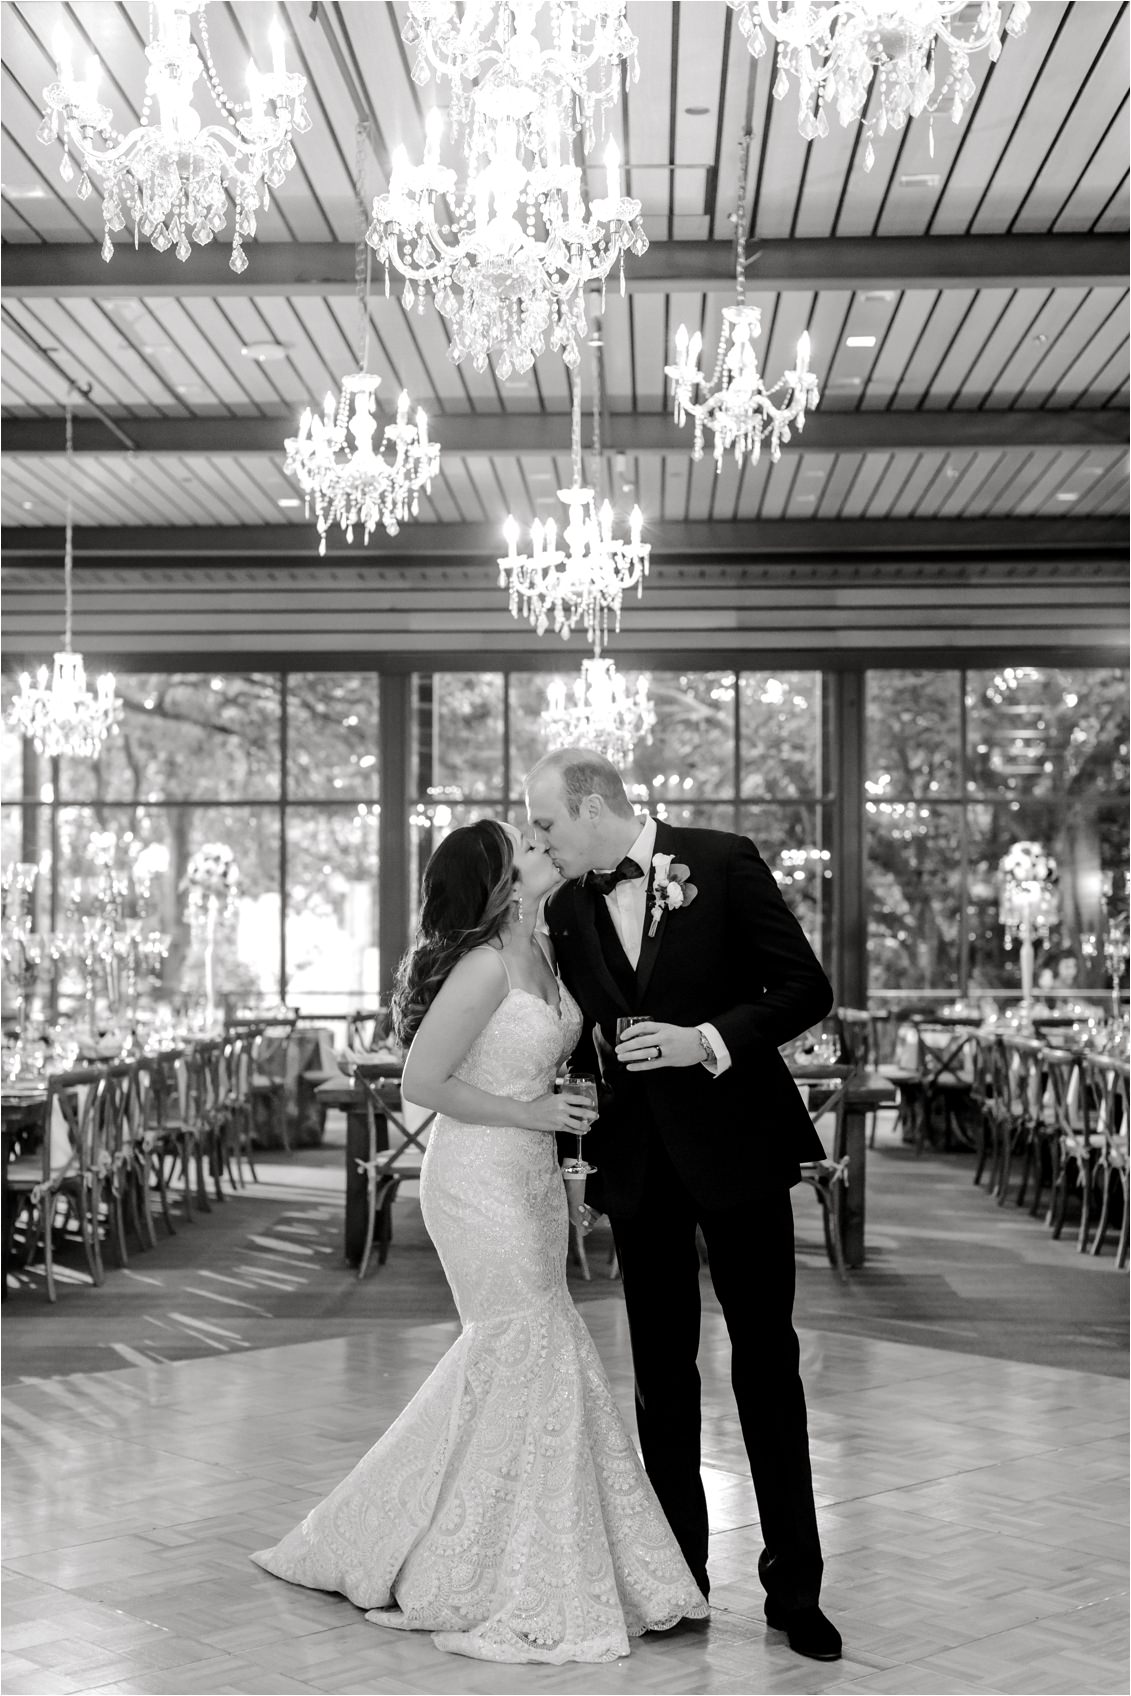 Wedding Day at Jack Guenther Pavilion by Gaby Caskey Photography